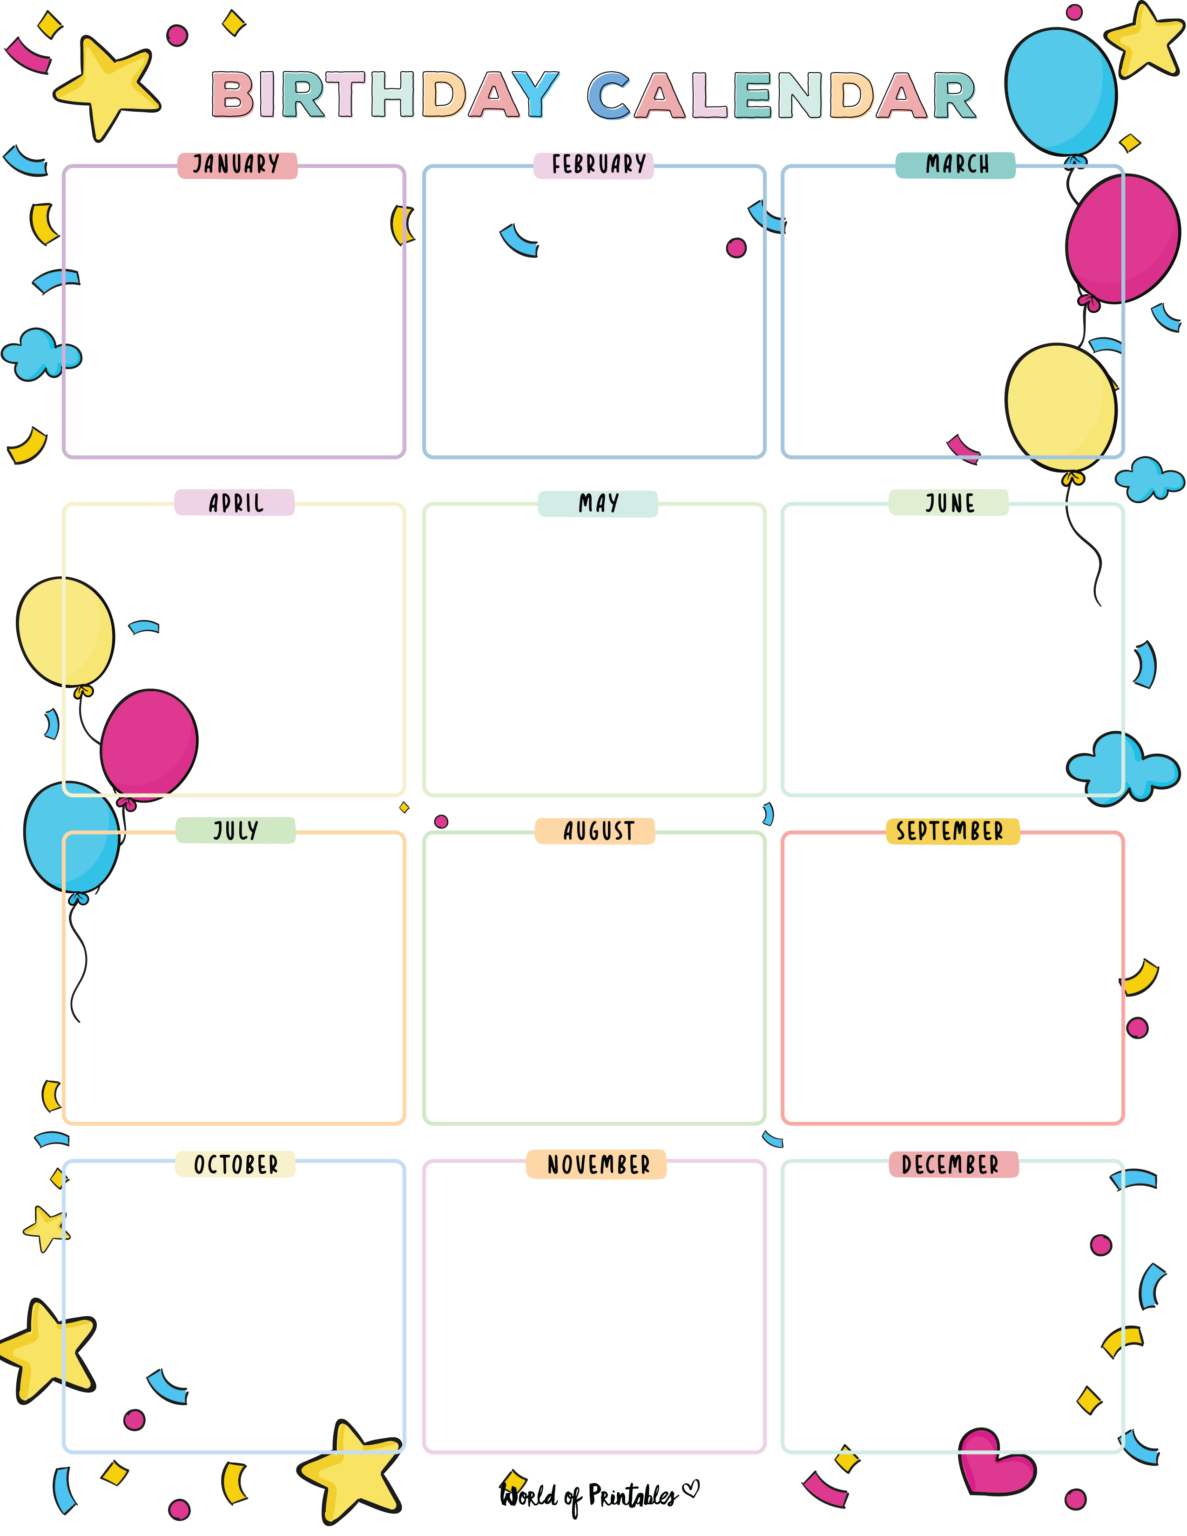 free birthday calendar for the workplace 25